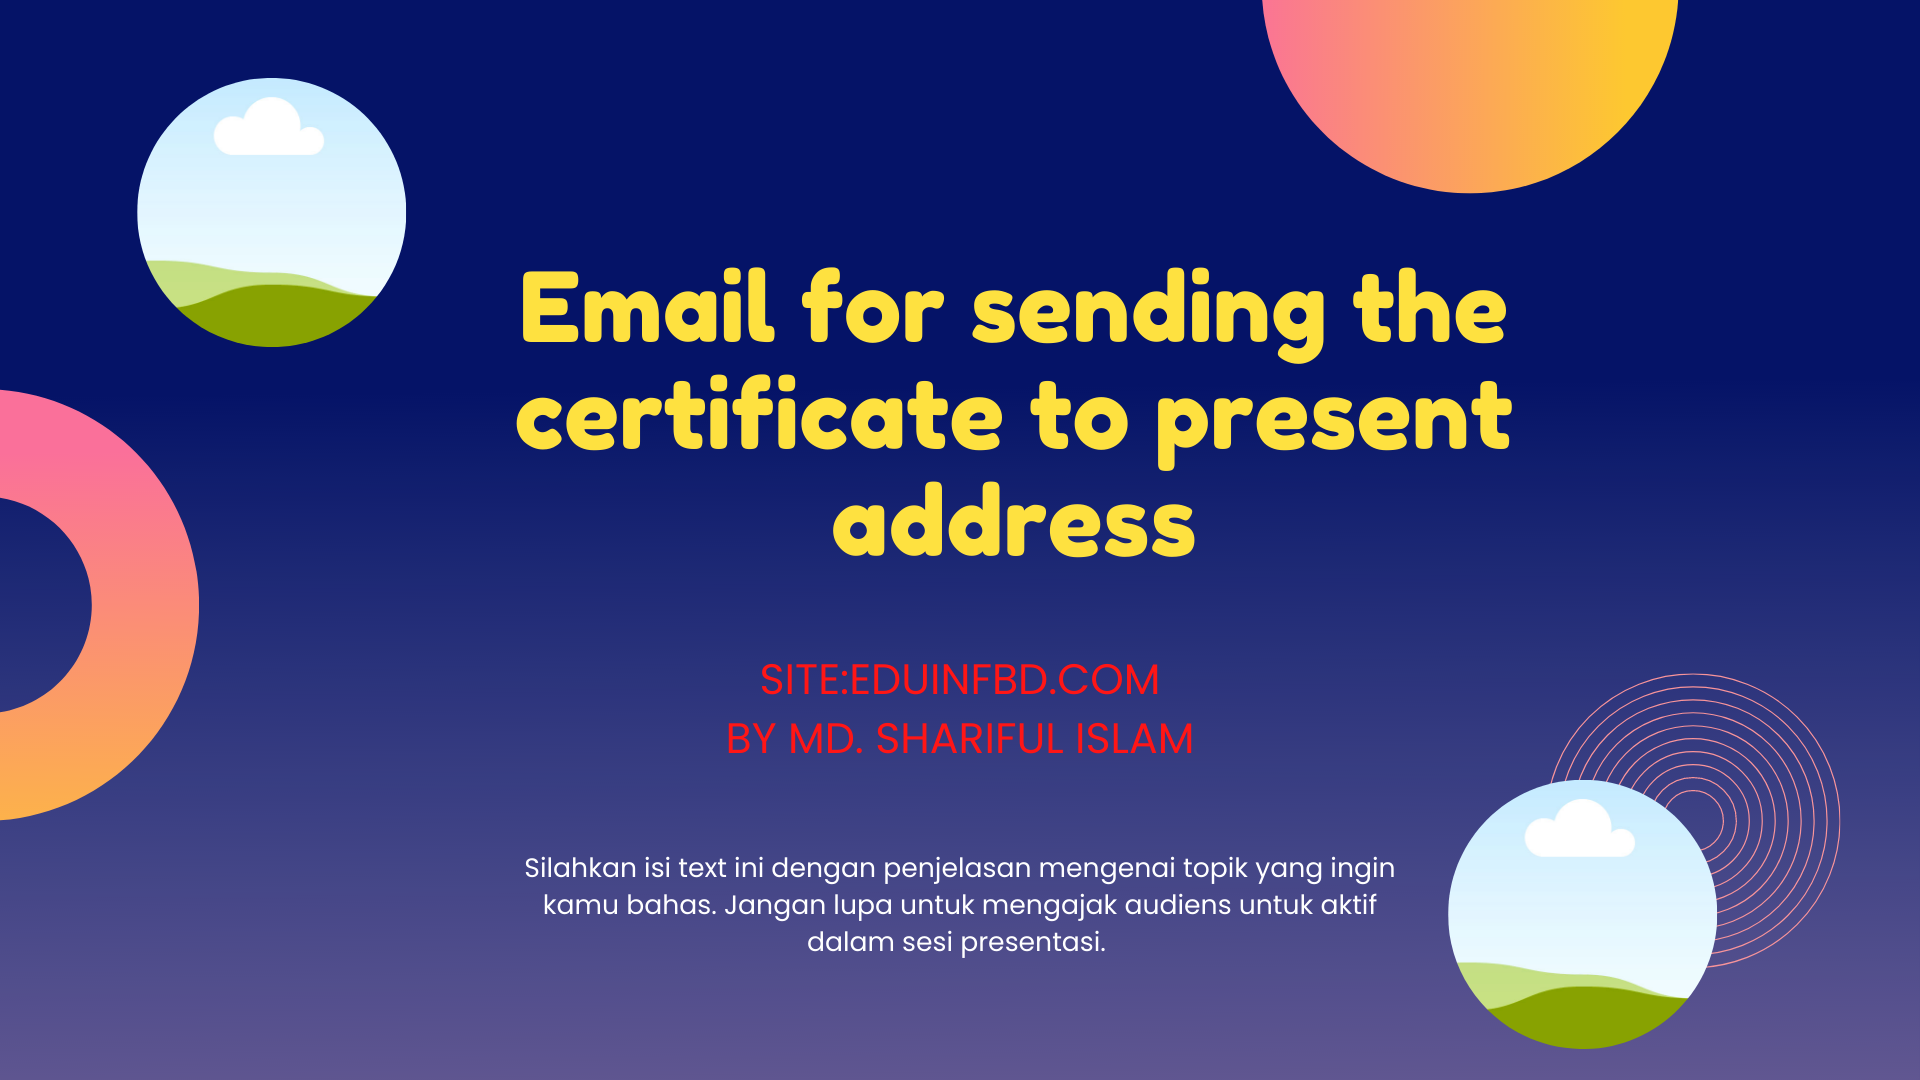 Email for sending the certificate to present address